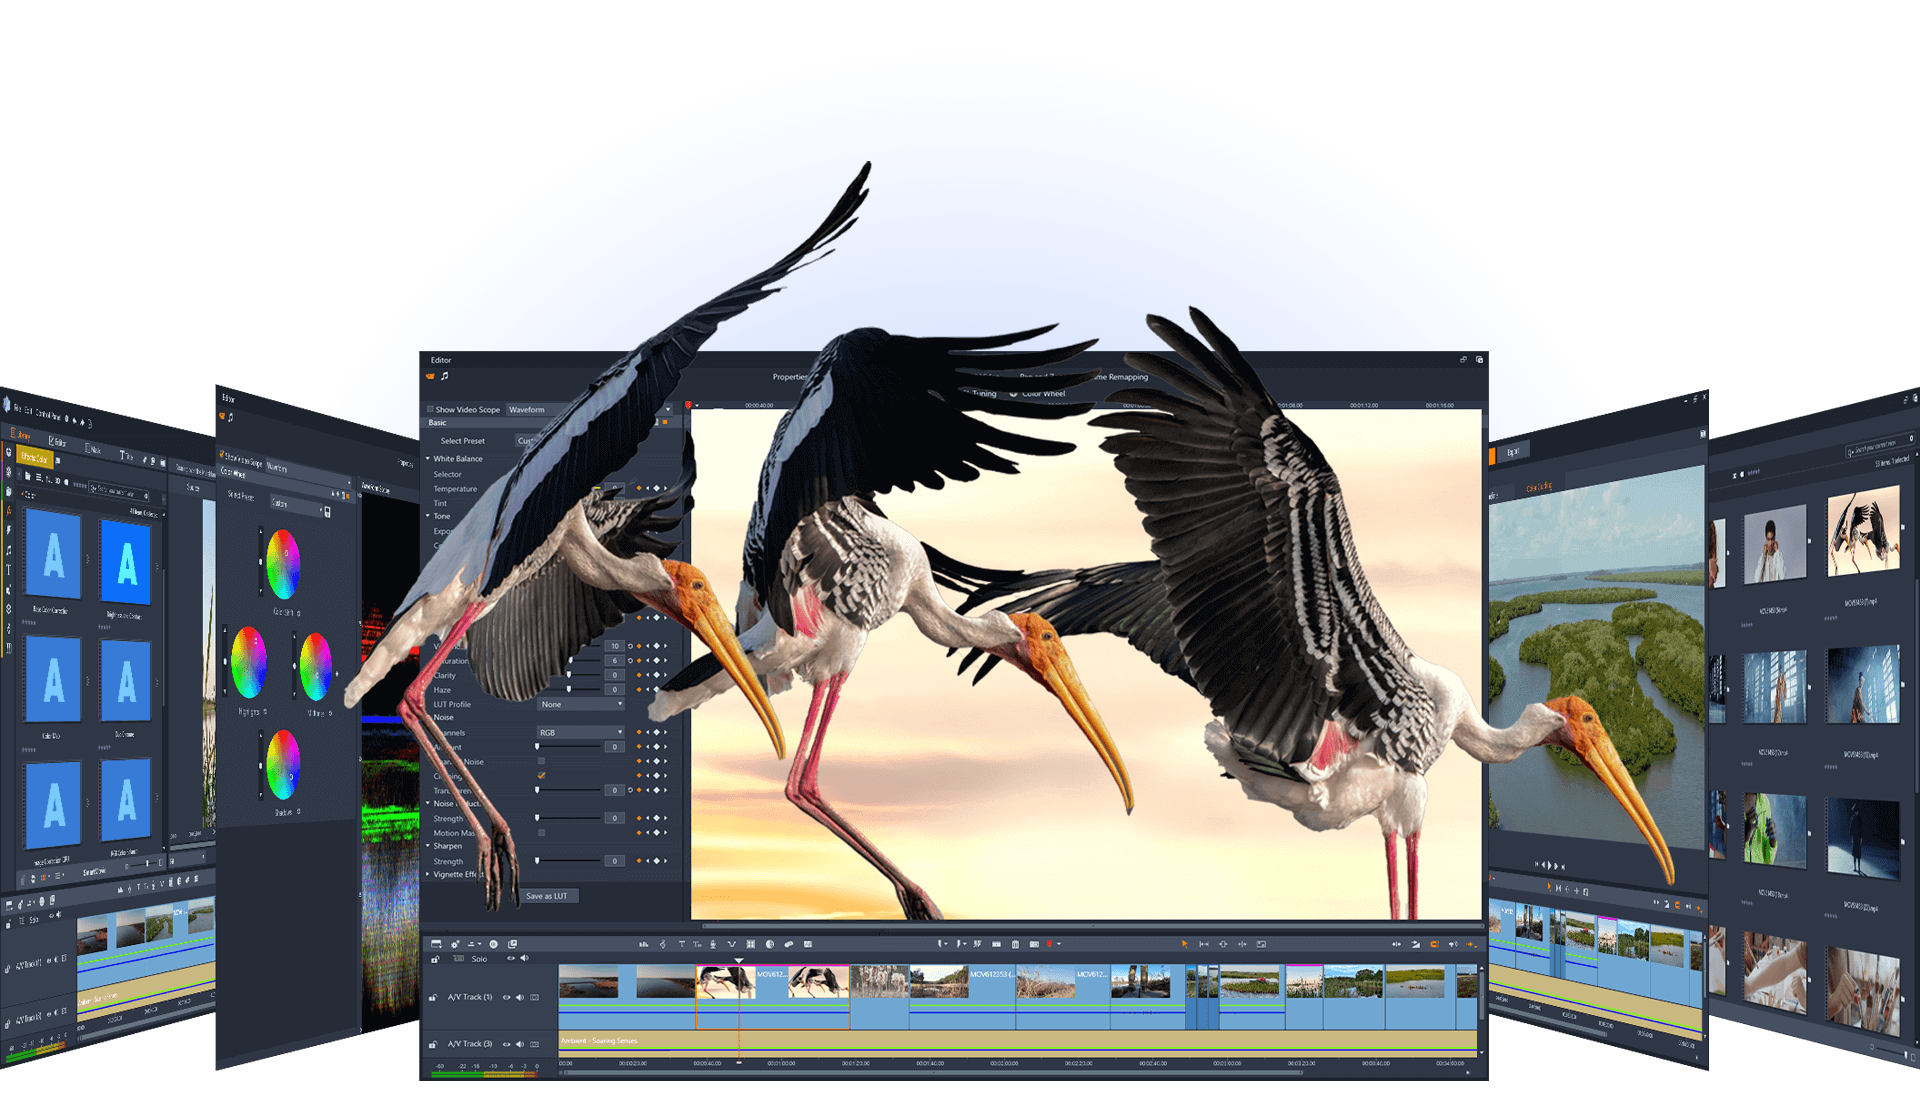 The Ultimate Video Editing Software for